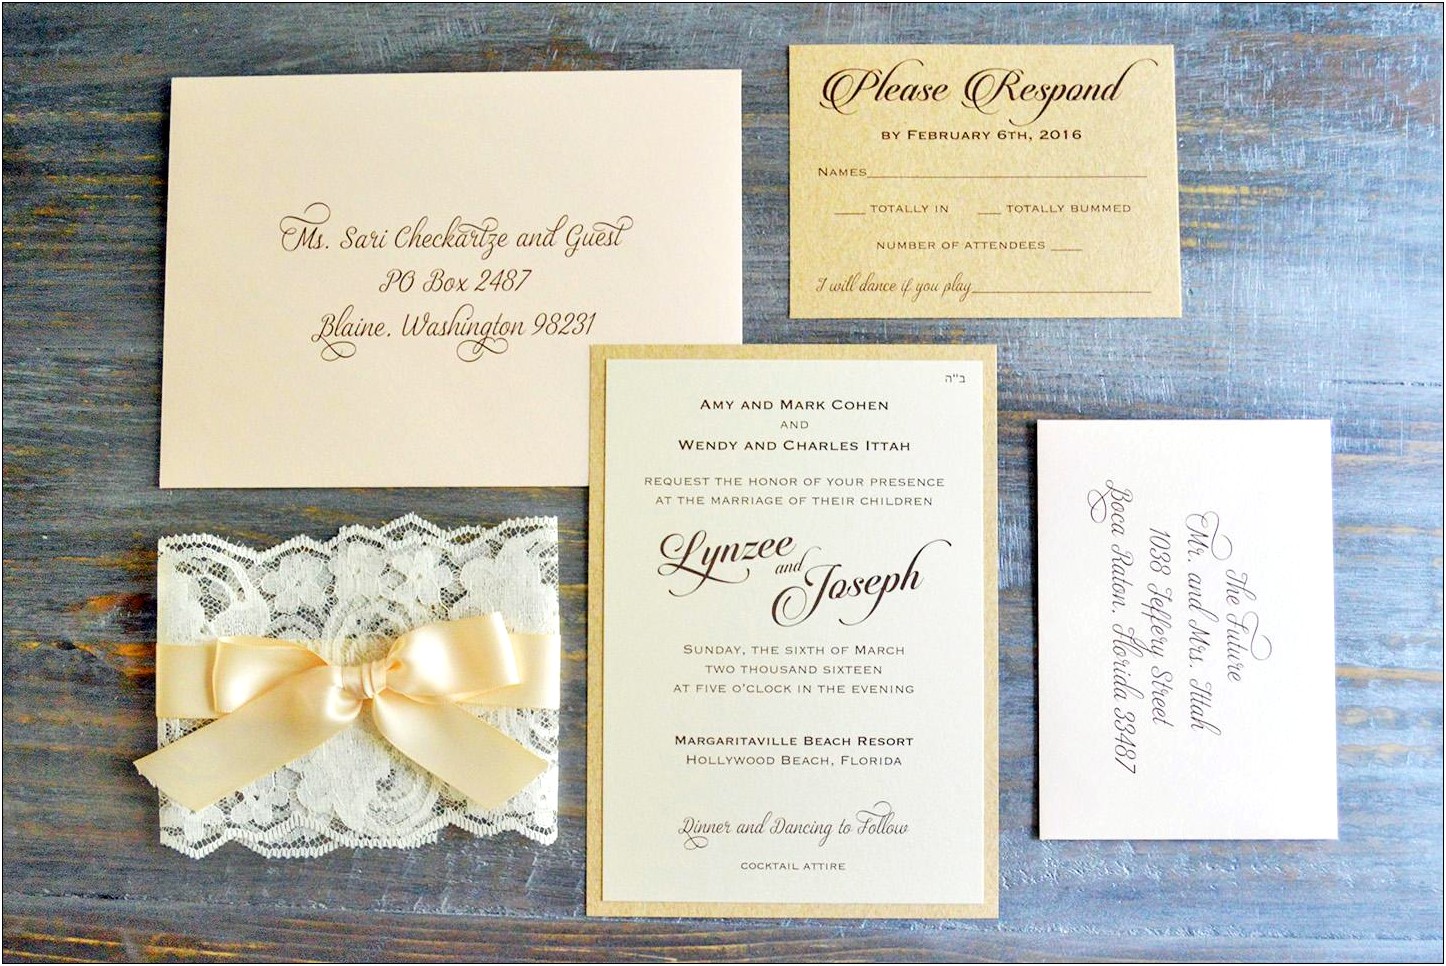 Is Proper To Address Wedding Invitation And Guest